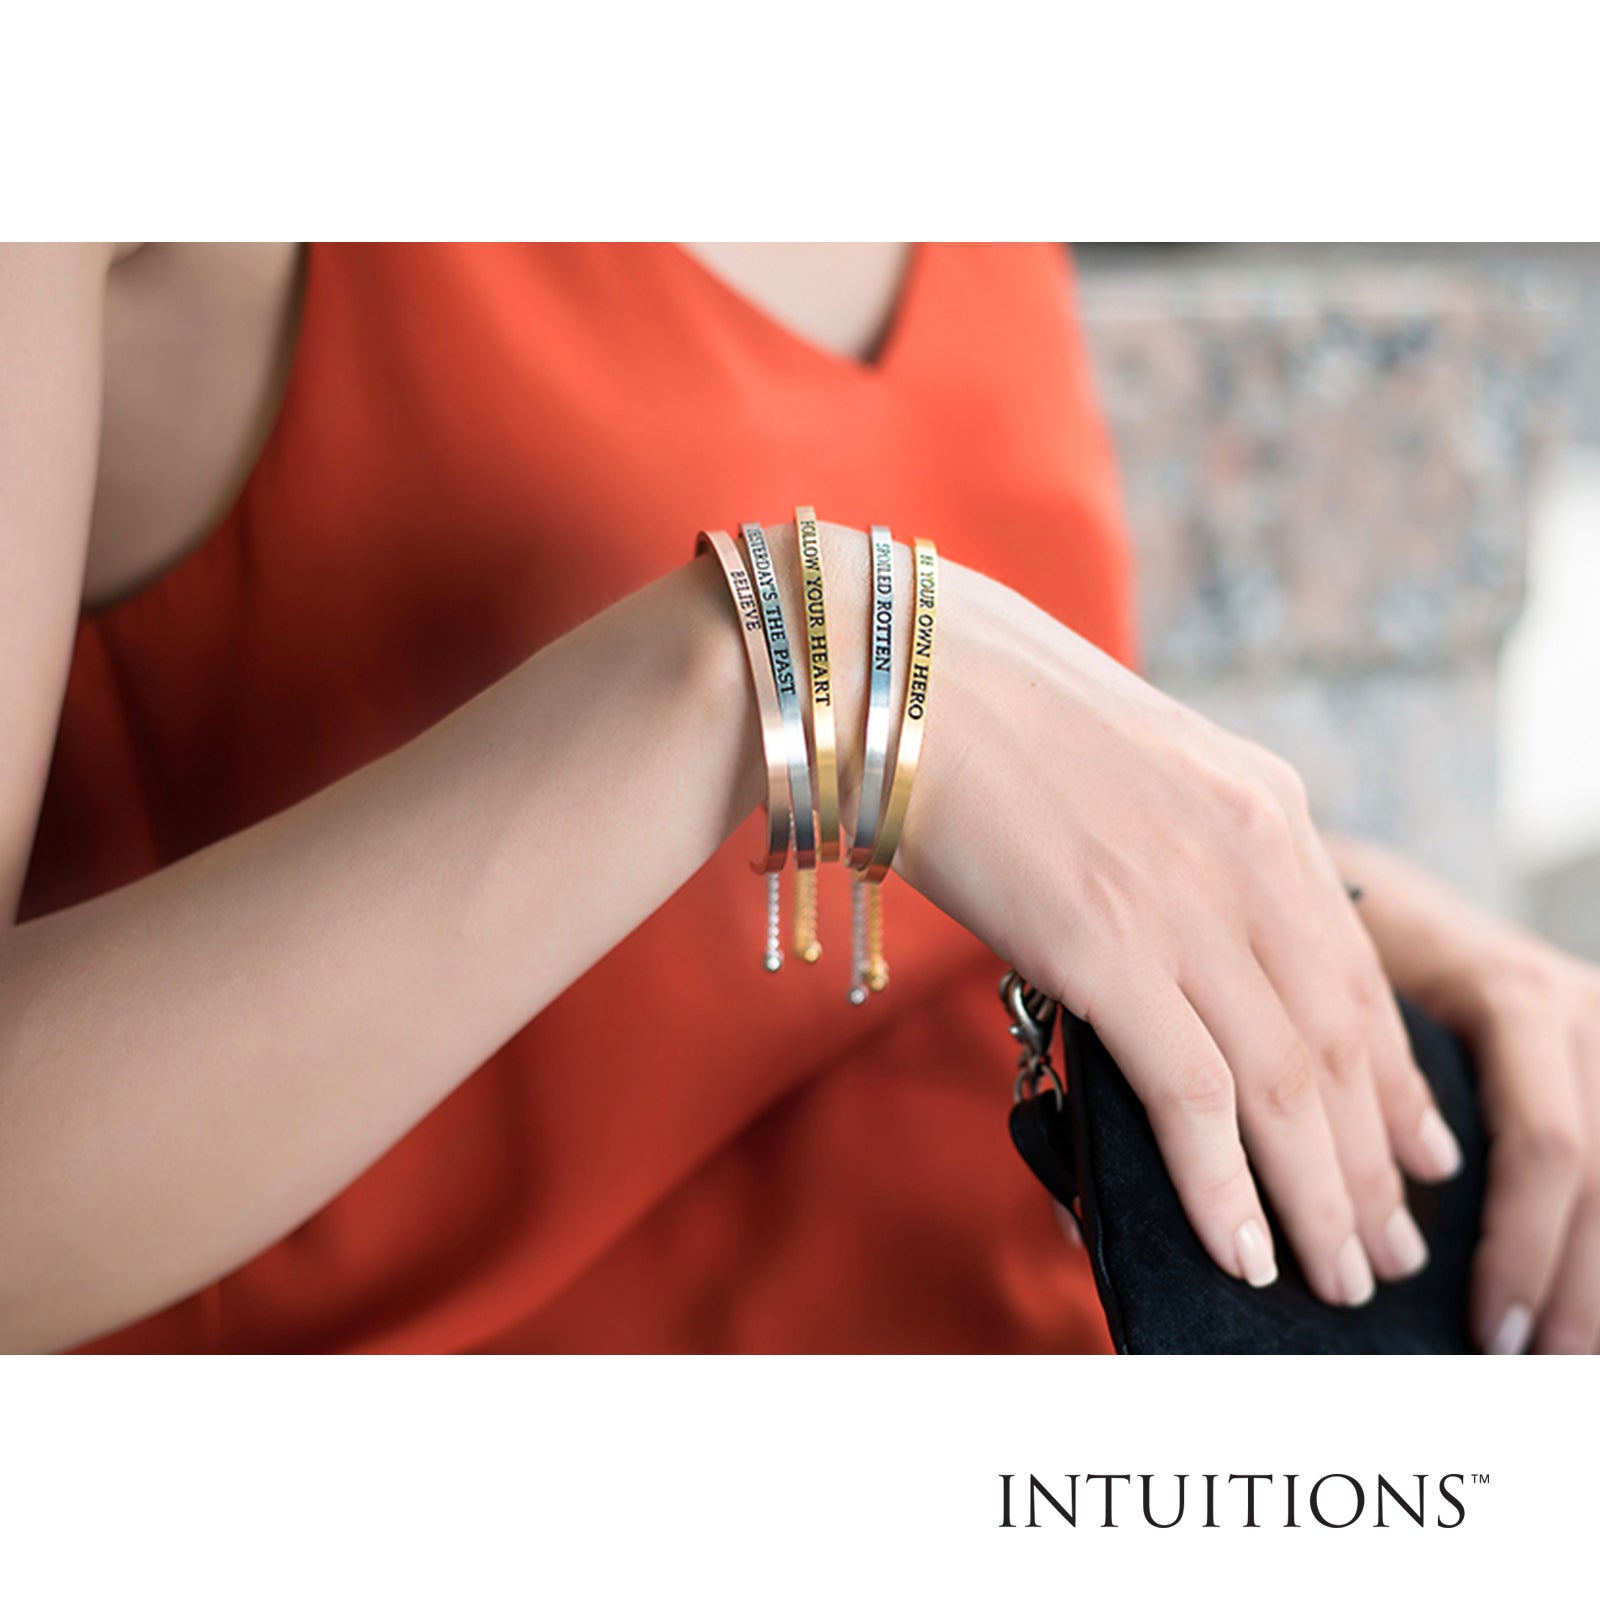 Intuitions Stainless Steel I GET BETTER AGE Diamond Accent Cuff Bangle Bracelet fine designer jewelry for men and women